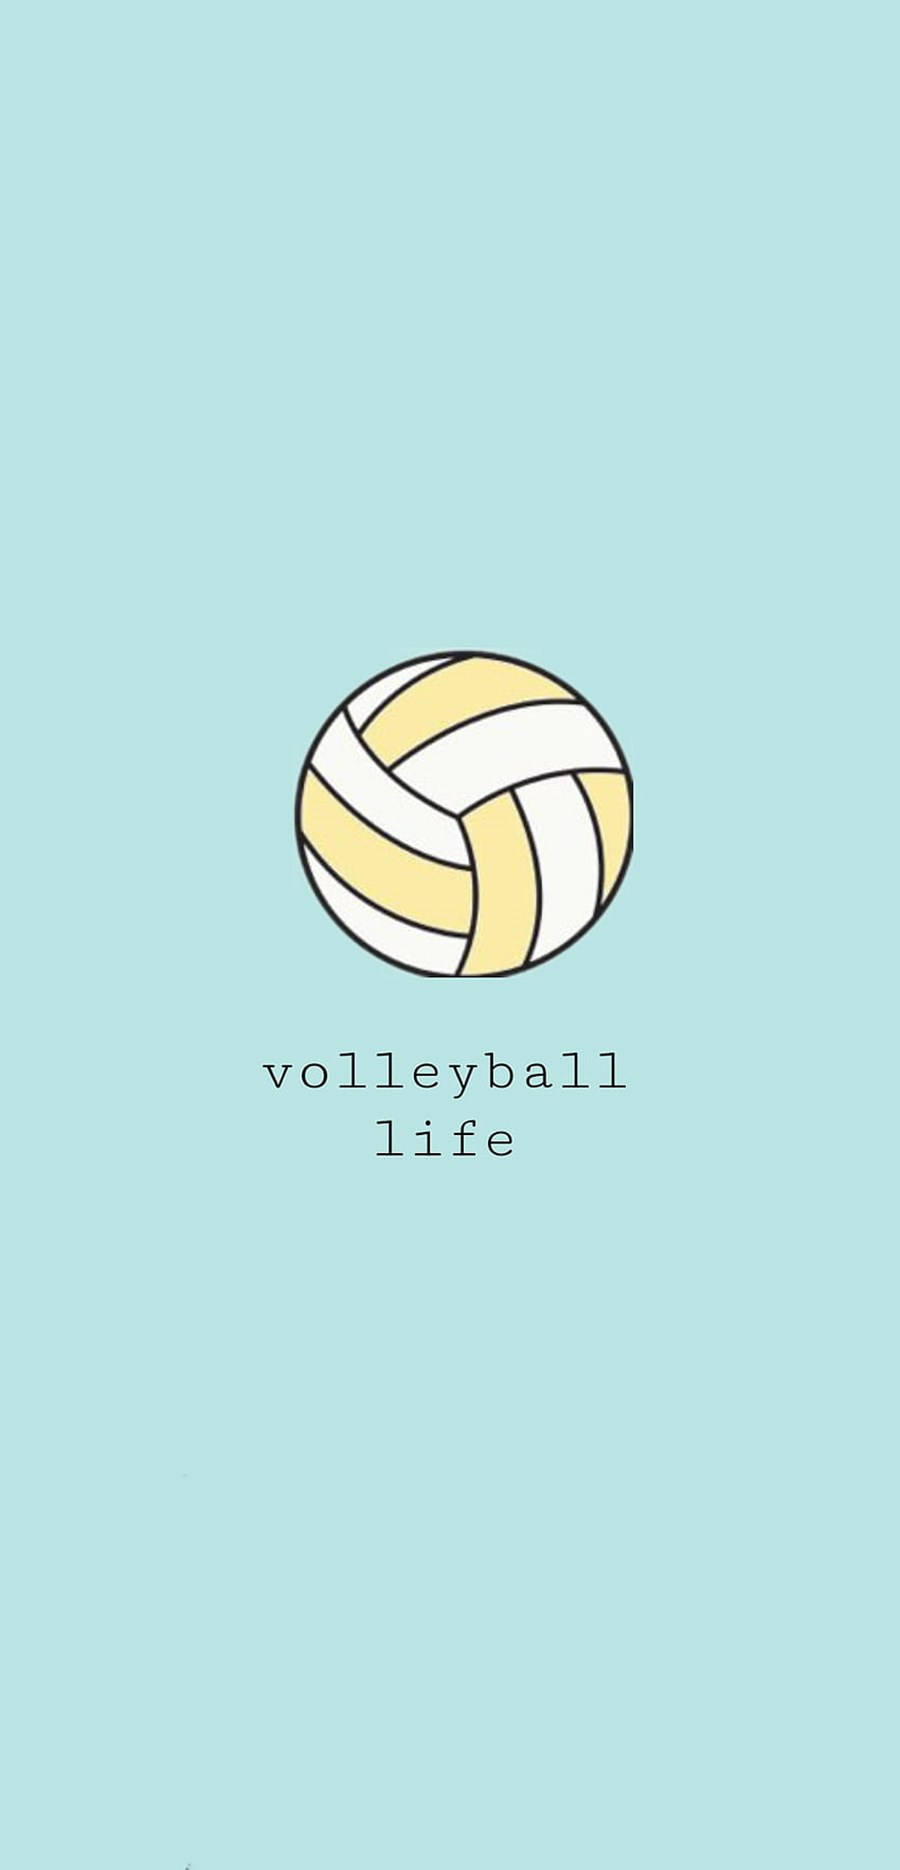 750 Volleyball Pictures  Download Free Images  Stock Photos on Unsplash